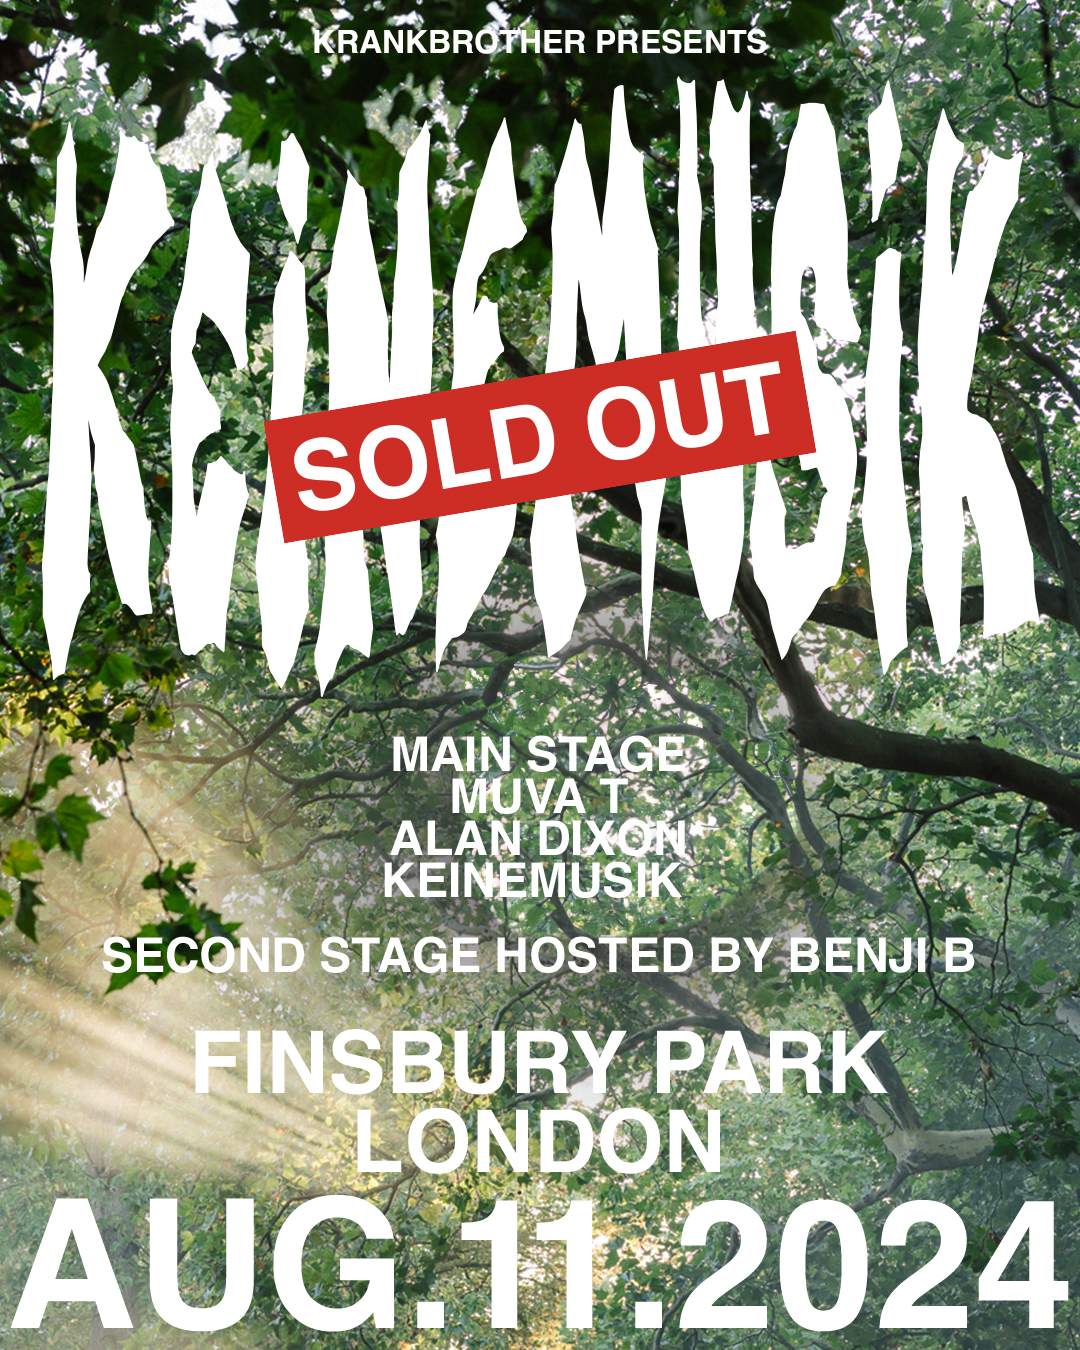 [SOLD OUT] krankbrother presents: Keinemusik - フライヤー表